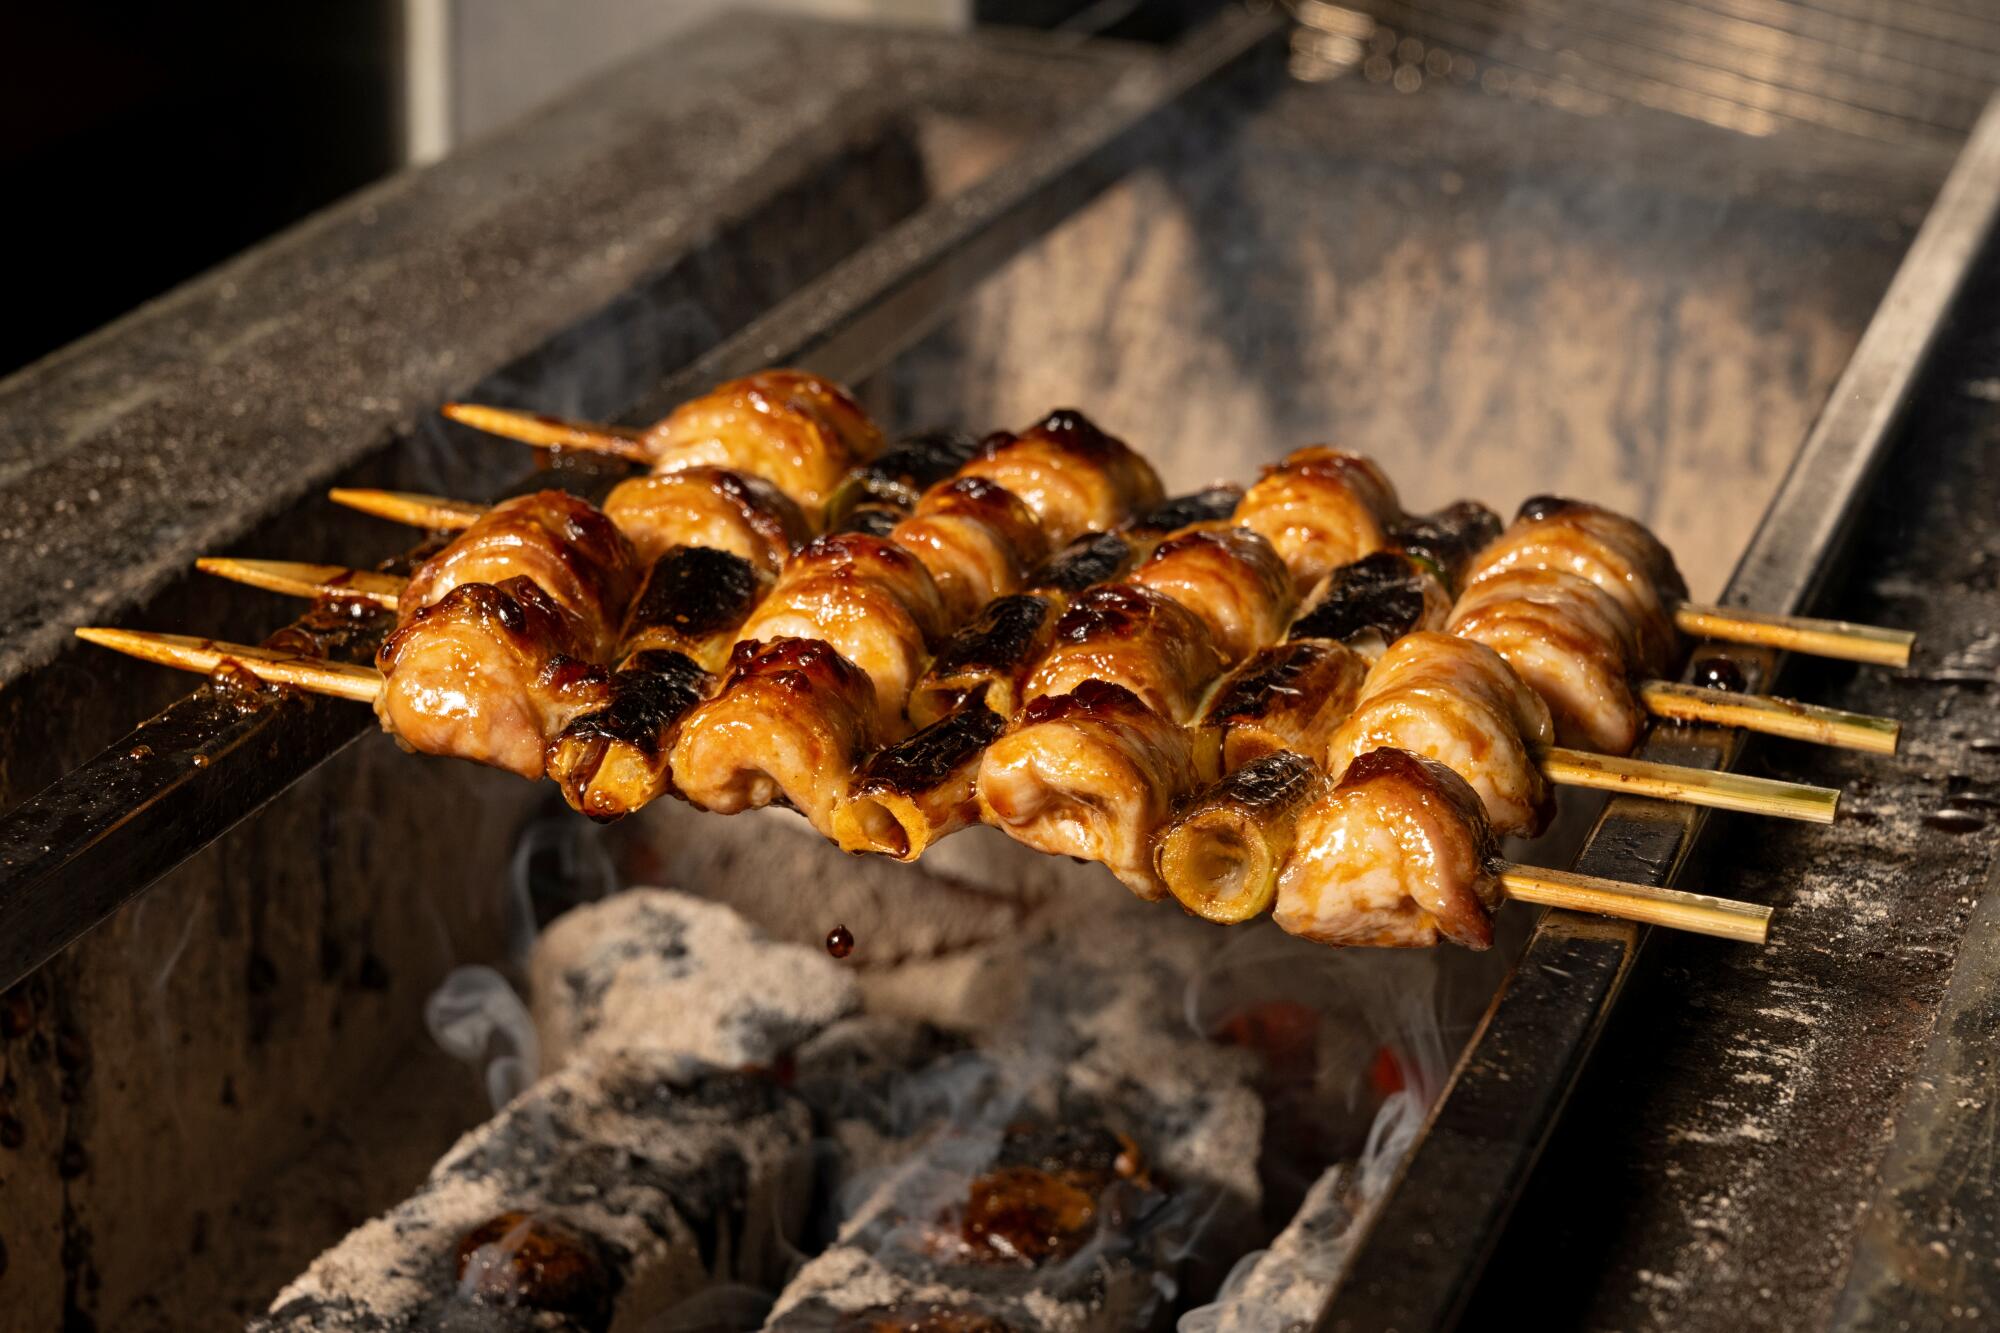 Pieces of chicken on skewers over a charcoal grill